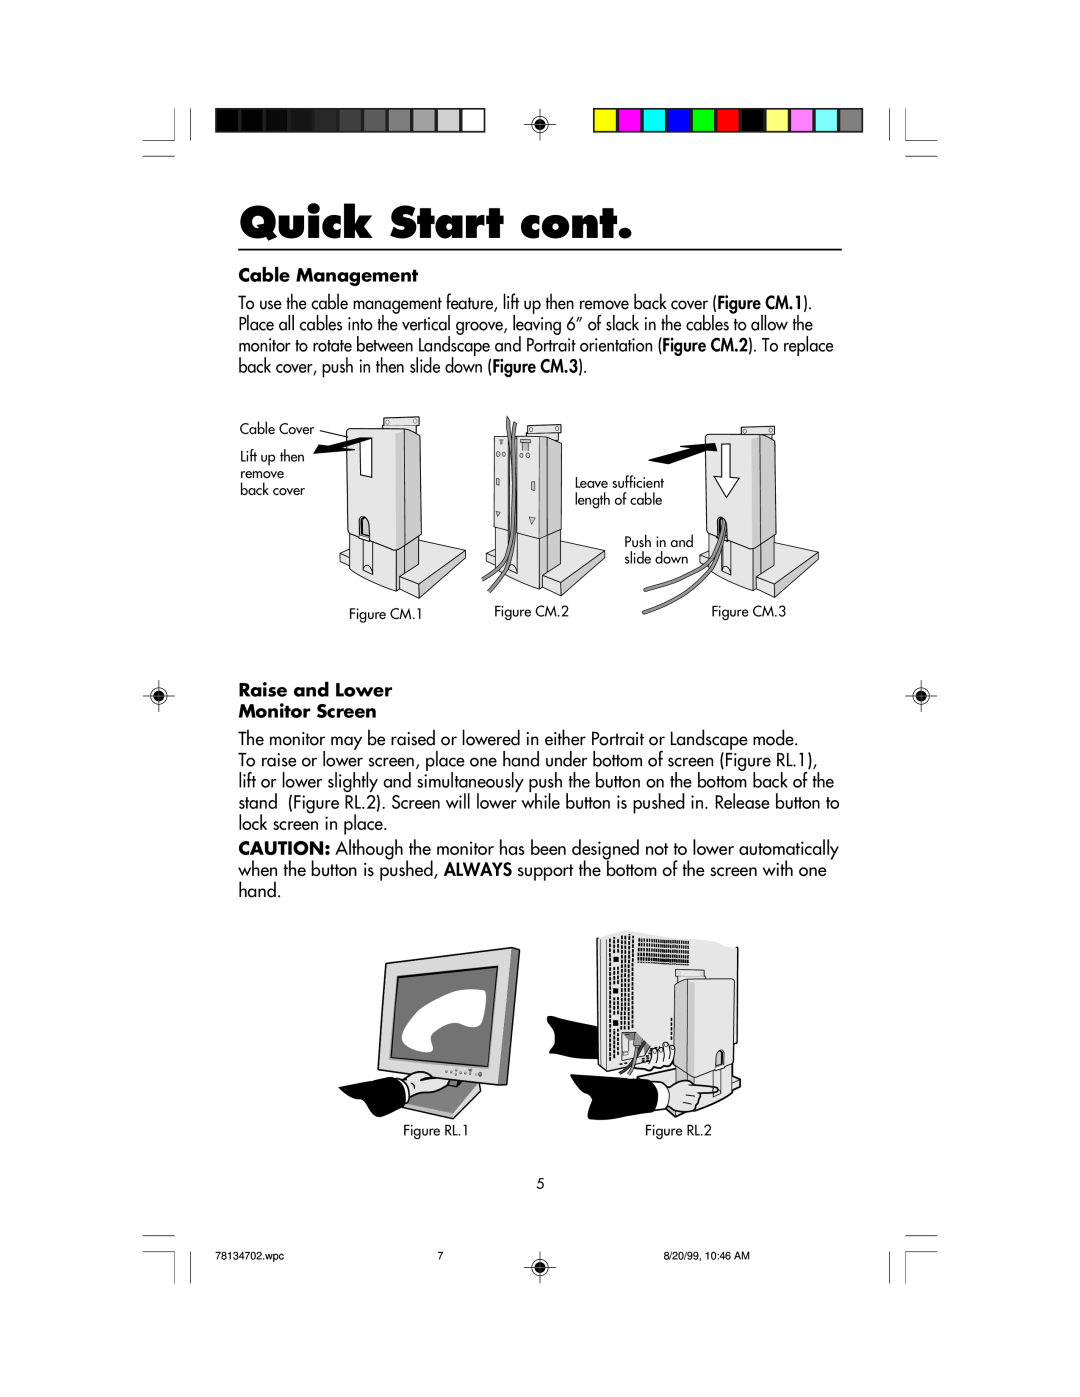 NEC LCD1510+ user manual Quick Start cont, Cable Management, Raise and Lower Monitor Screen 